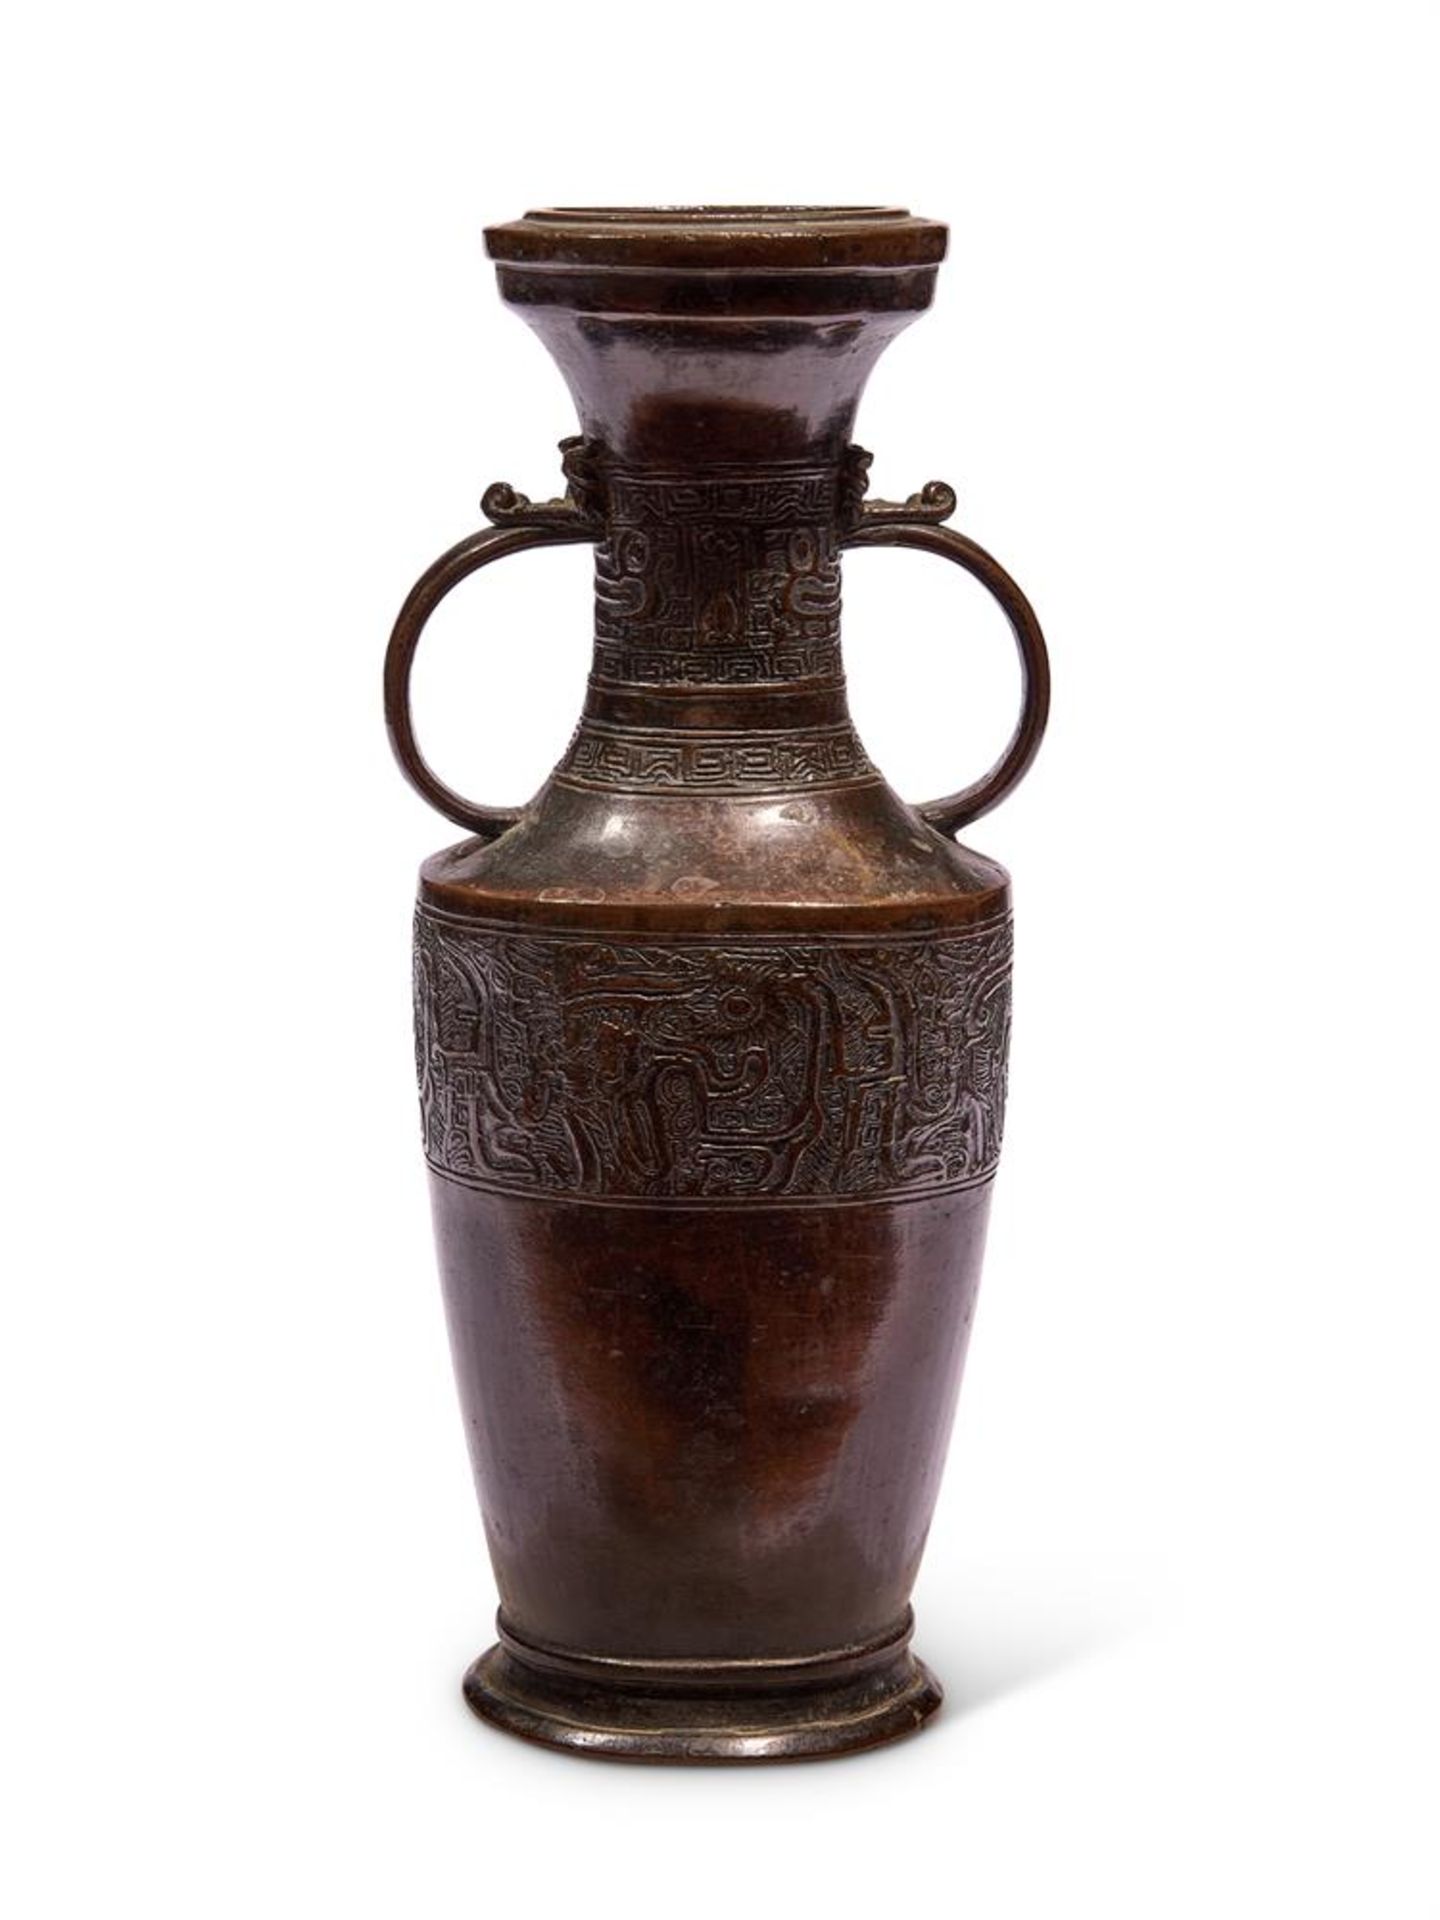 A CHINESE BRONZE 'ARCHAISTIC' TWIN-HANDLED VASE, MING DYNASTY